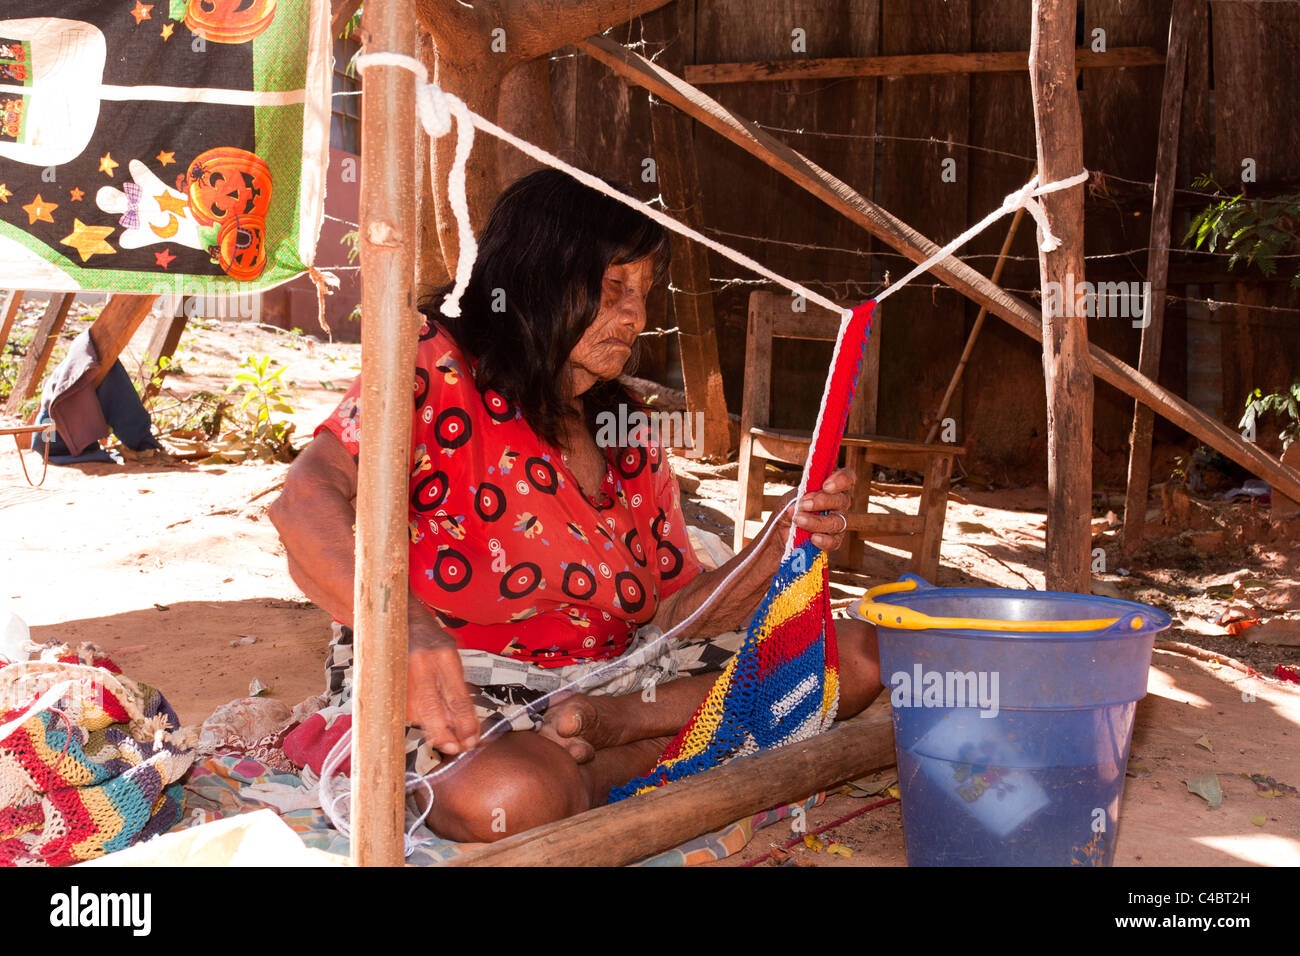 Maka tribe old woman making a handcraft, Maka tribe indigenous village on the outskirts of Asuncion, Paraguay Stock Photo